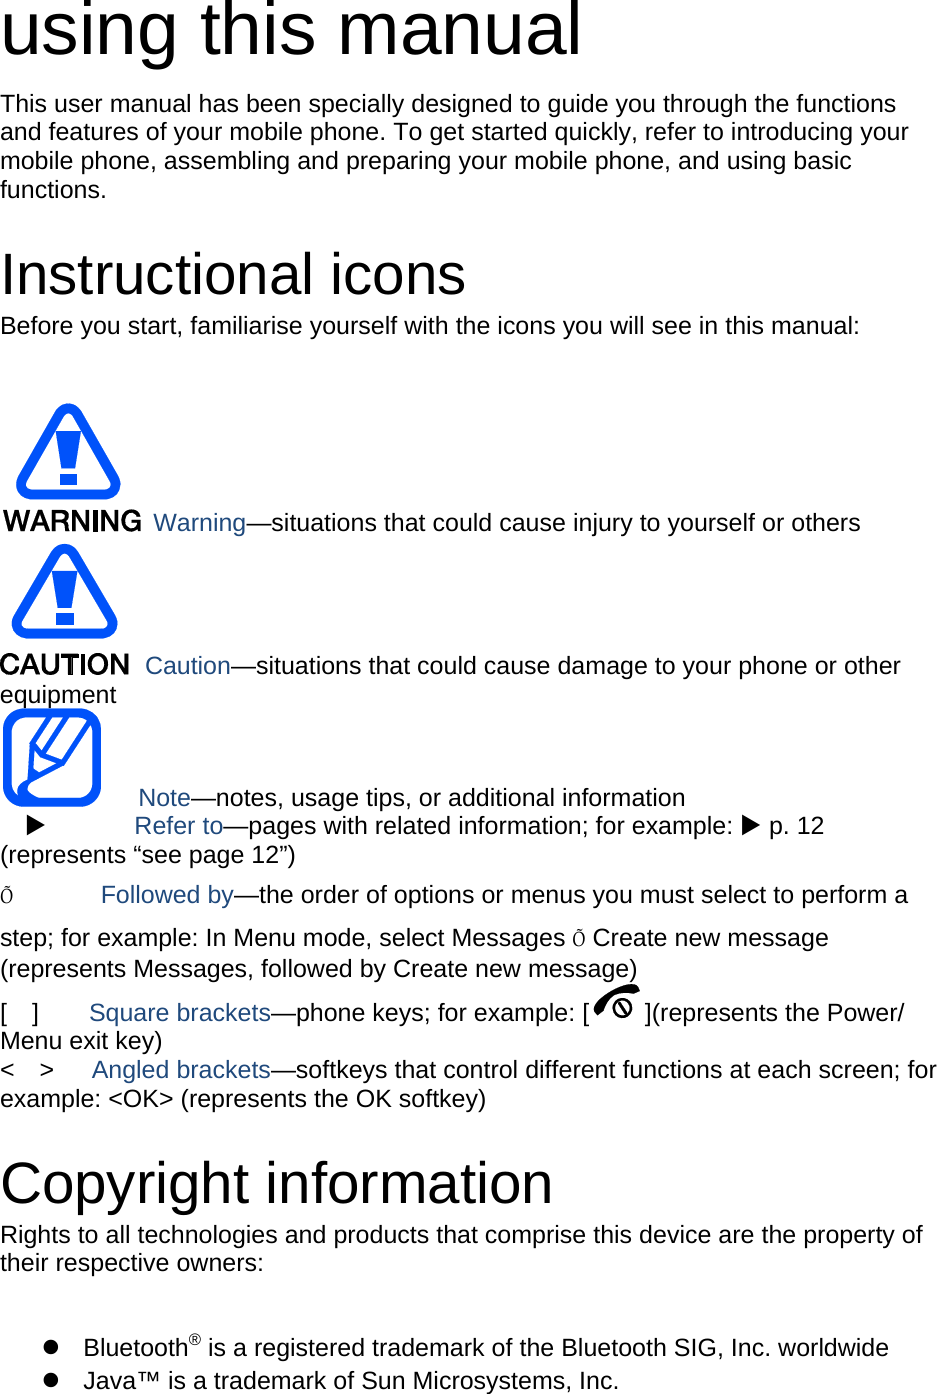 using this manual This user manual has been specially designed to guide you through the functions and features of your mobile phone. To get started quickly, refer to introducing your mobile phone, assembling and preparing your mobile phone, and using basic functions.   Instructional icons Before you start, familiarise yourself with the icons you will see in this manual:     Warning—situations that could cause injury to yourself or others  Caution—situations that could cause damage to your phone or other equipment    Note—notes, usage tips, or additional information          Refer to—pages with related information; for example:  p. 12 (represents “see page 12”) Õ       Followed by—the order of options or menus you must select to perform a step; for example: In Menu mode, select Messages Õ Create new message (represents Messages, followed by Create new message) [  ]    Square brackets—phone keys; for example: [ ](represents the Power/ Menu exit key) &lt;  &gt;   Angled brackets—softkeys that control different functions at each screen; for example: &lt;OK&gt; (represents the OK softkey)  Copyright information Rights to all technologies and products that comprise this device are the property of their respective owners:   Bluetooth® is a registered trademark of the Bluetooth SIG, Inc. worldwide   Java™ is a trademark of Sun Microsystems, Inc. 